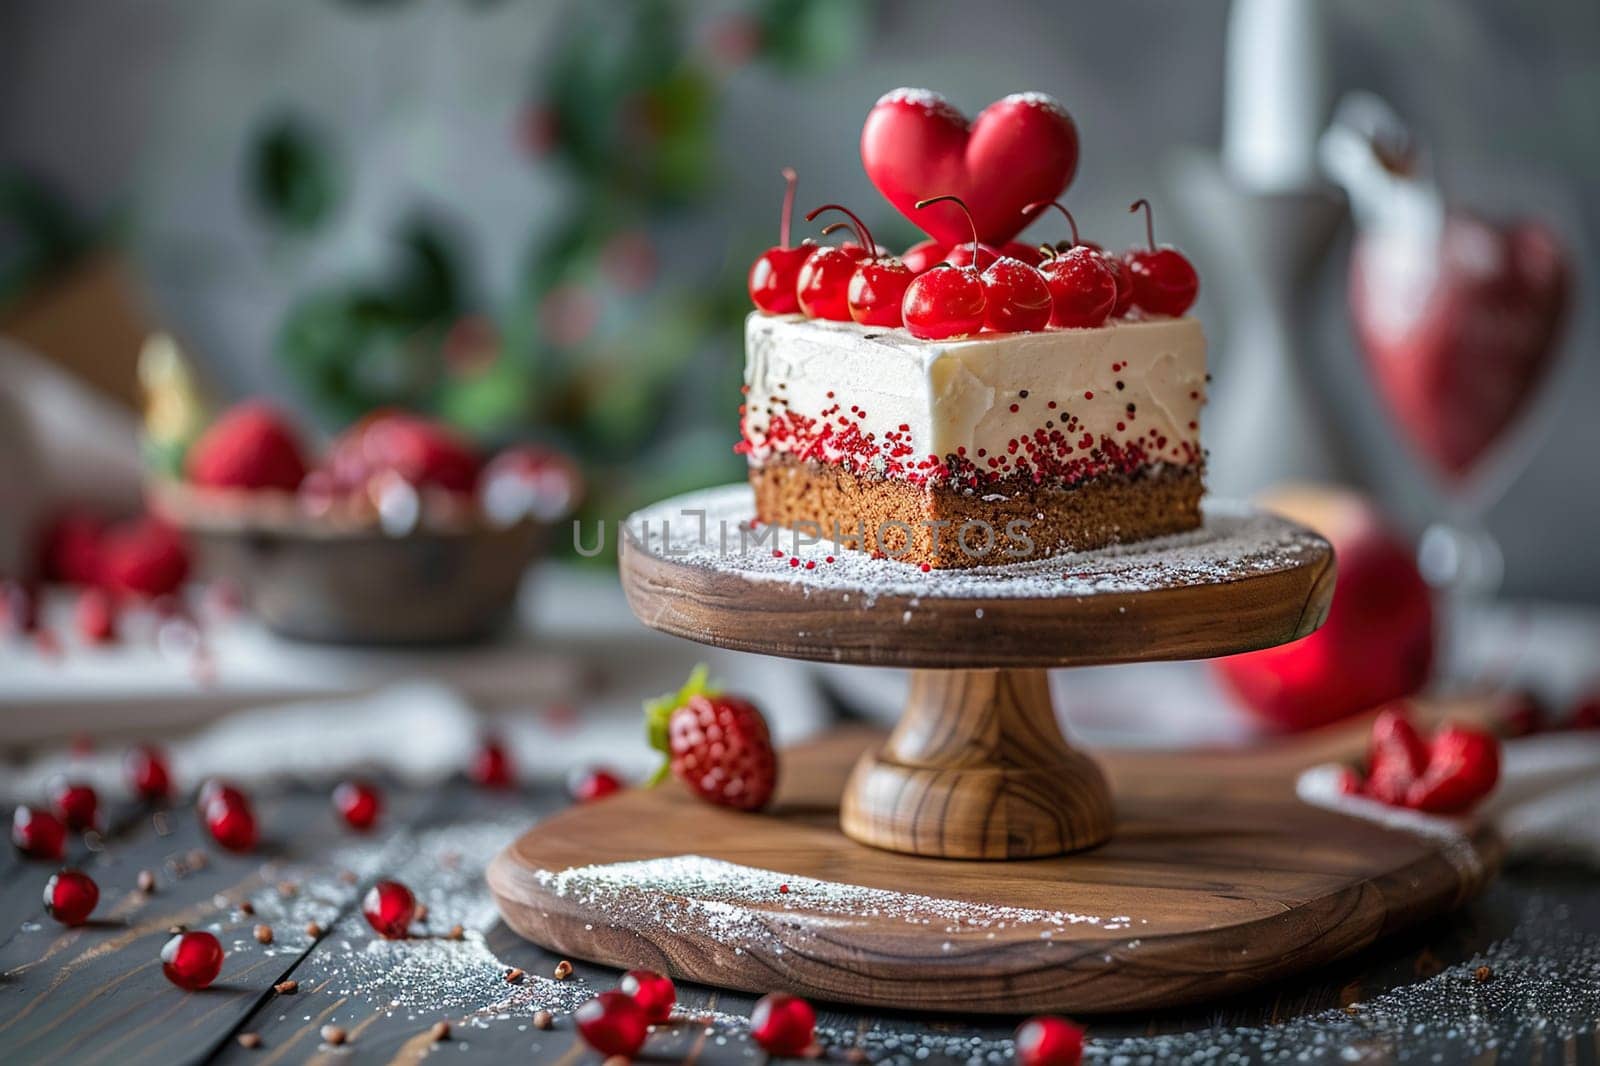 Heart-shaped cake on a wooden stand with decor. Concept for celebrating birthday, Valentine's Day, Mother's Day or March 8th.